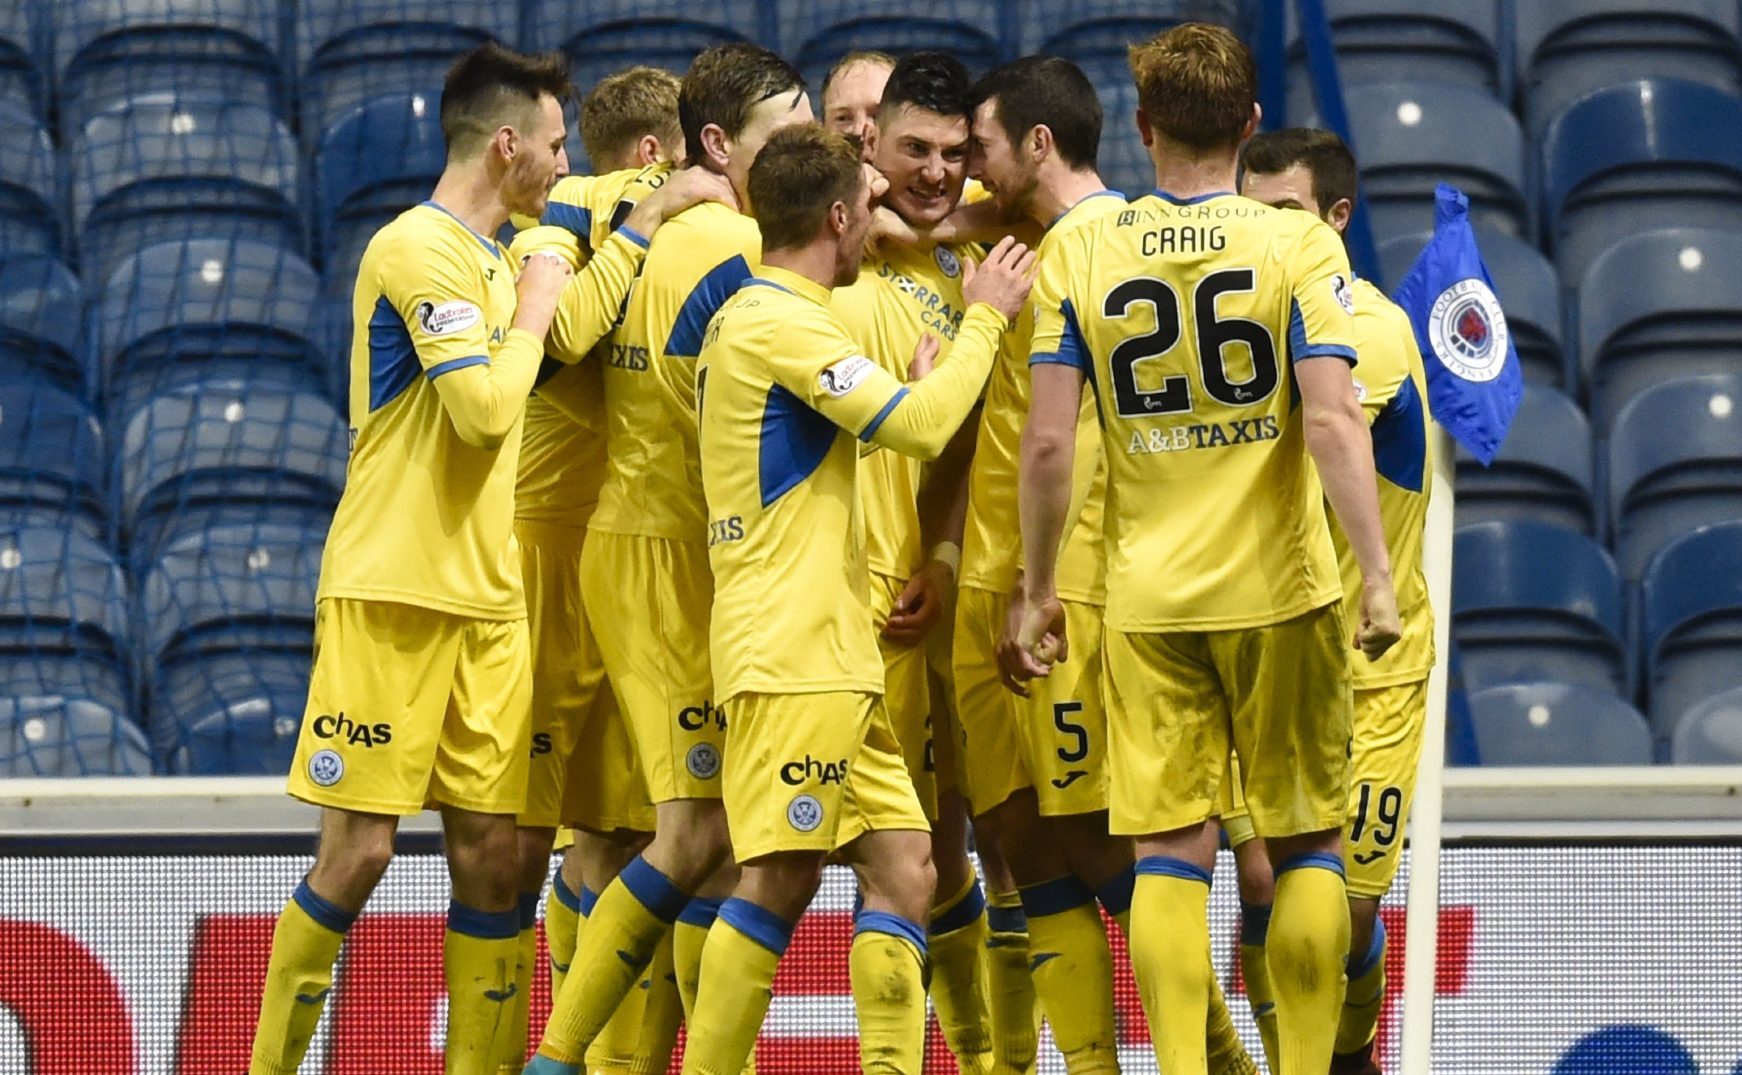 The St Johnstone players celebrate their third goal at Ibrox.